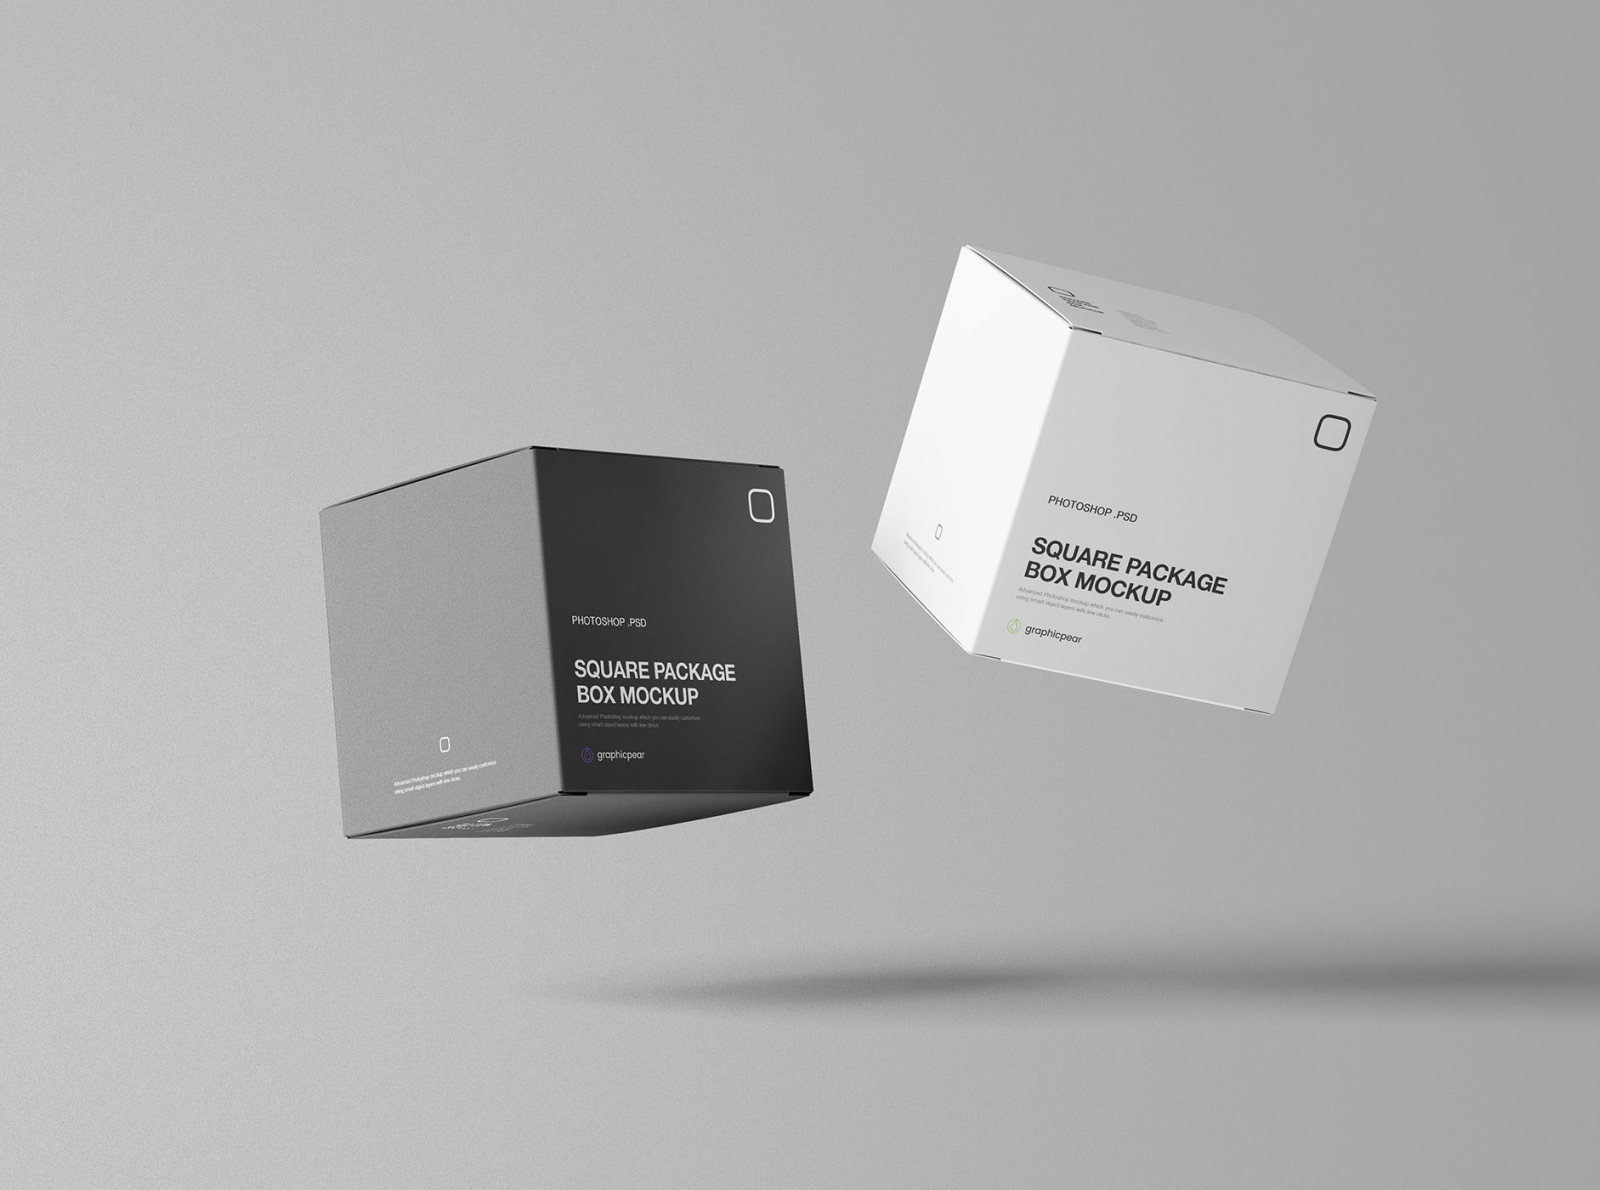 Download Square Package Box Mockup by Graphic Pear on Dribbble